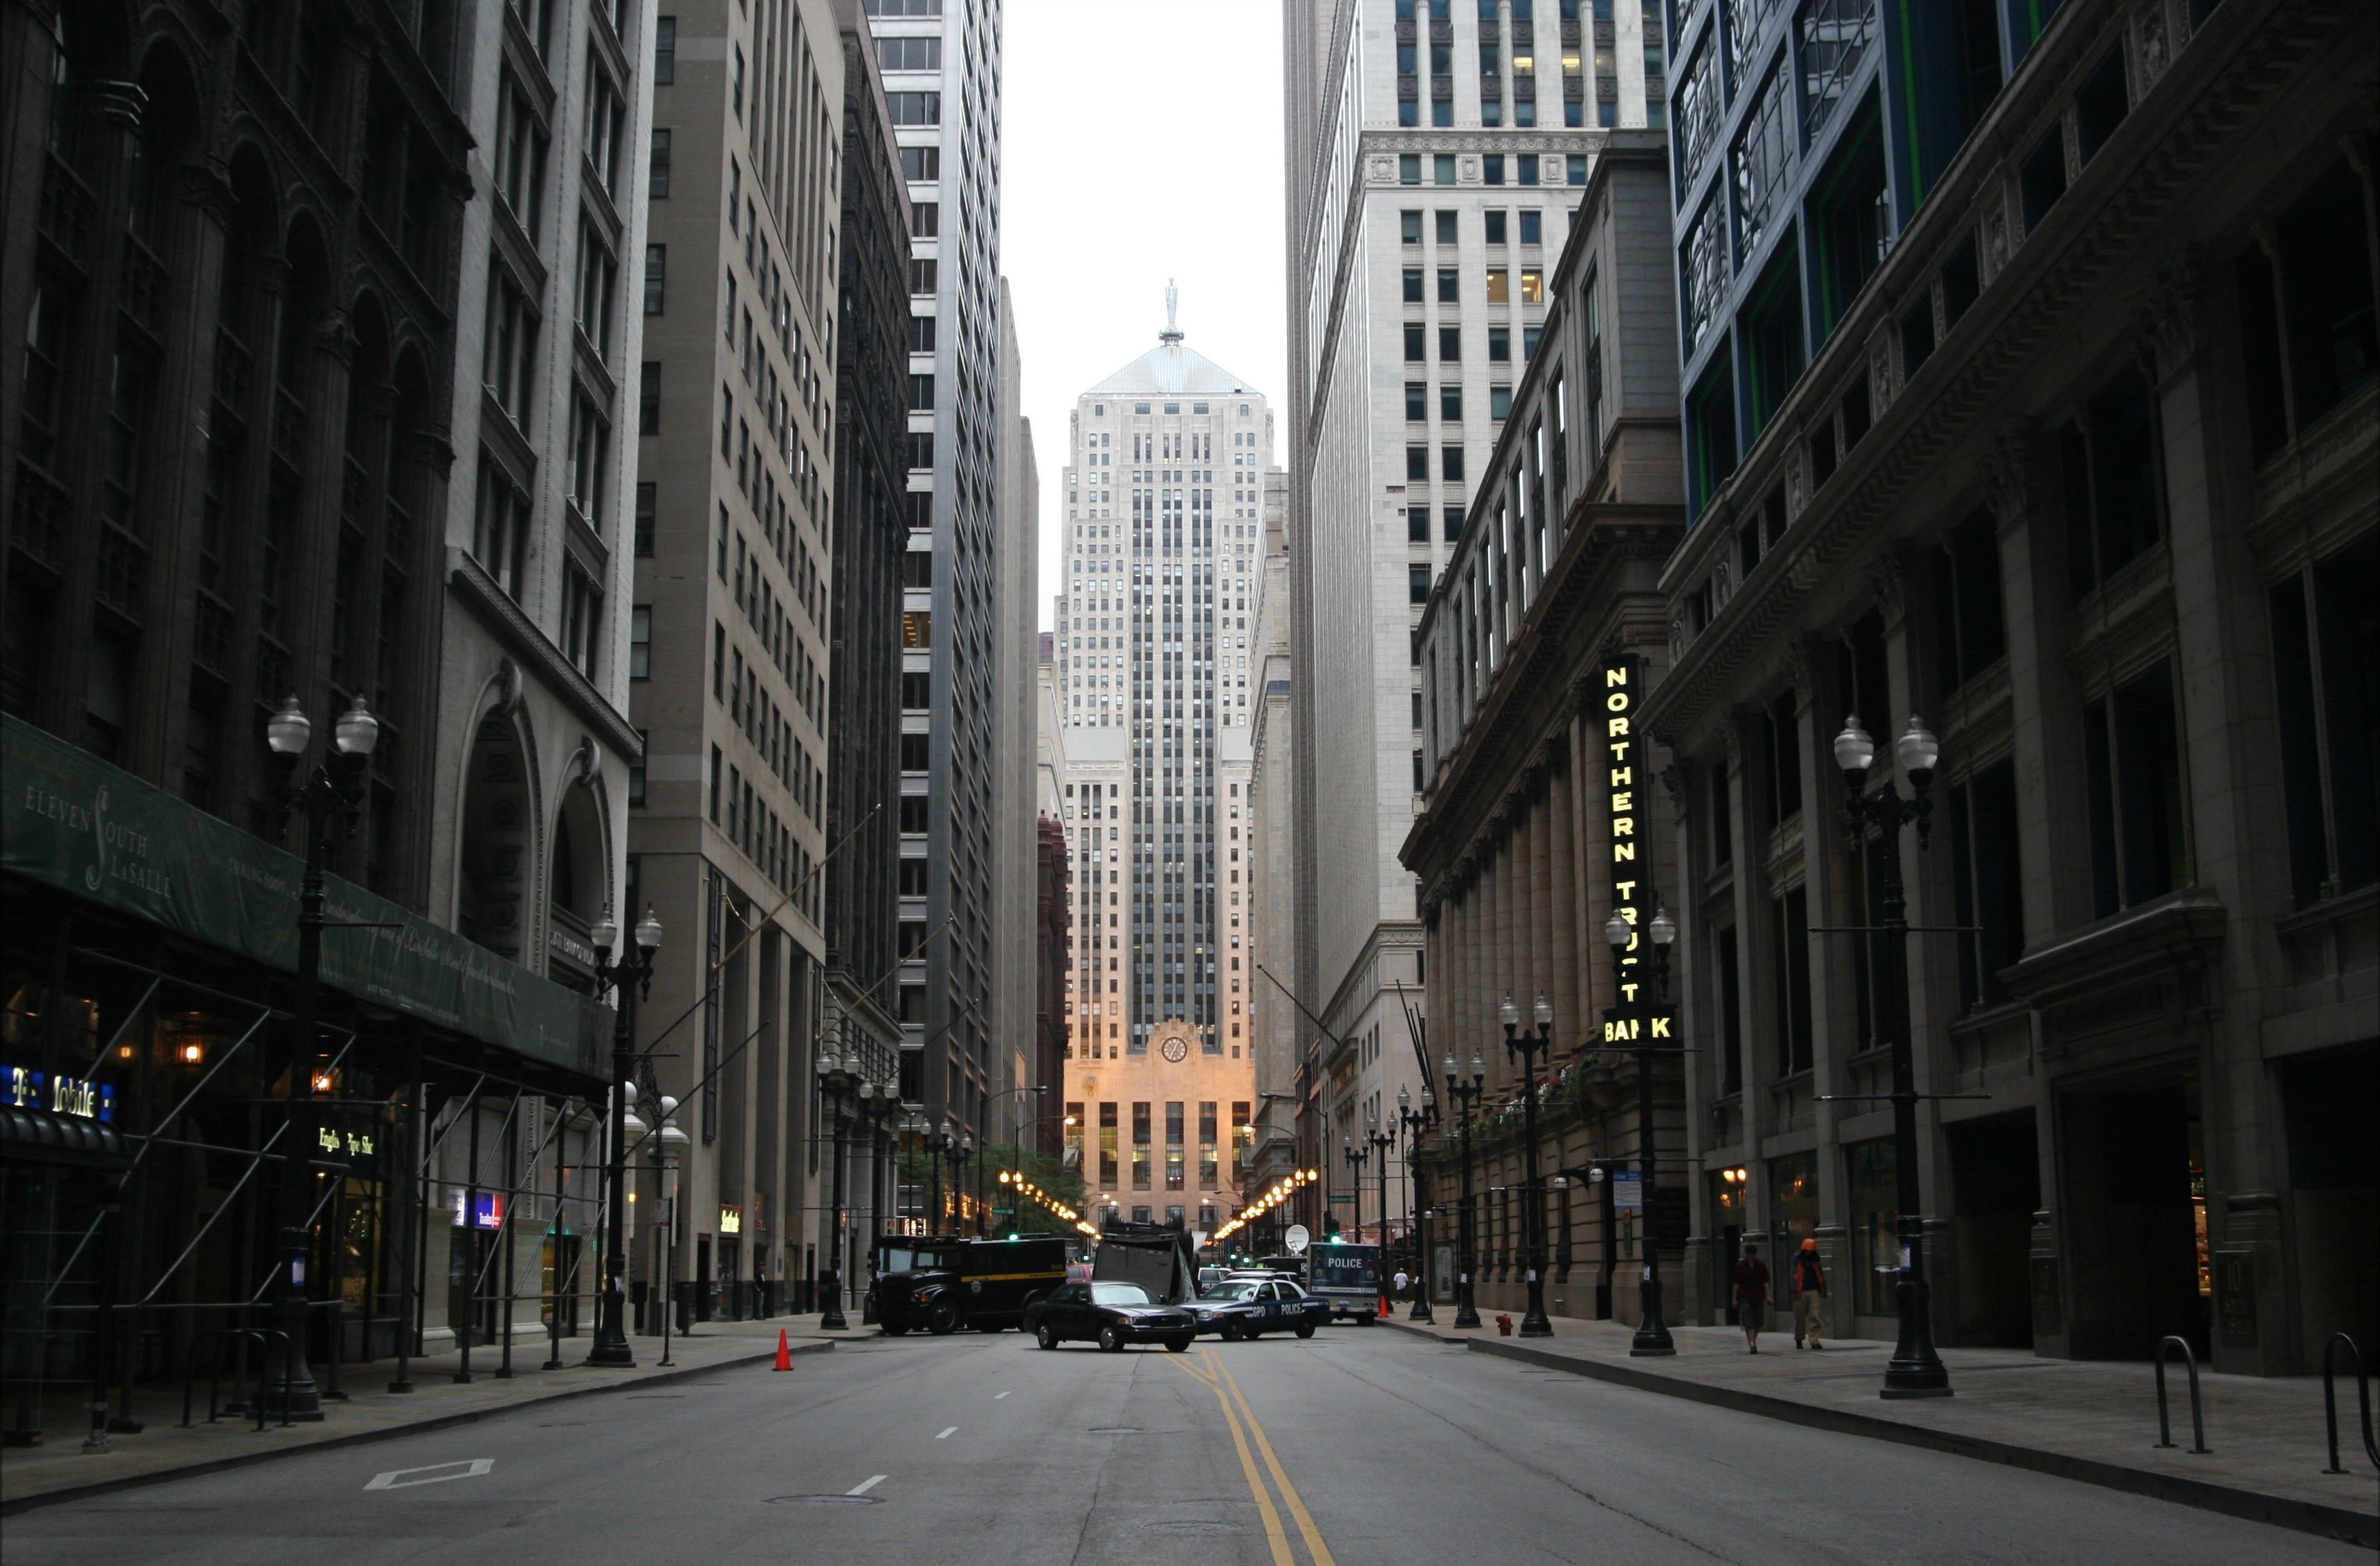 Movie filming in downtown Chicago with streets closed to the public (Photo by: Raul Esparza III)